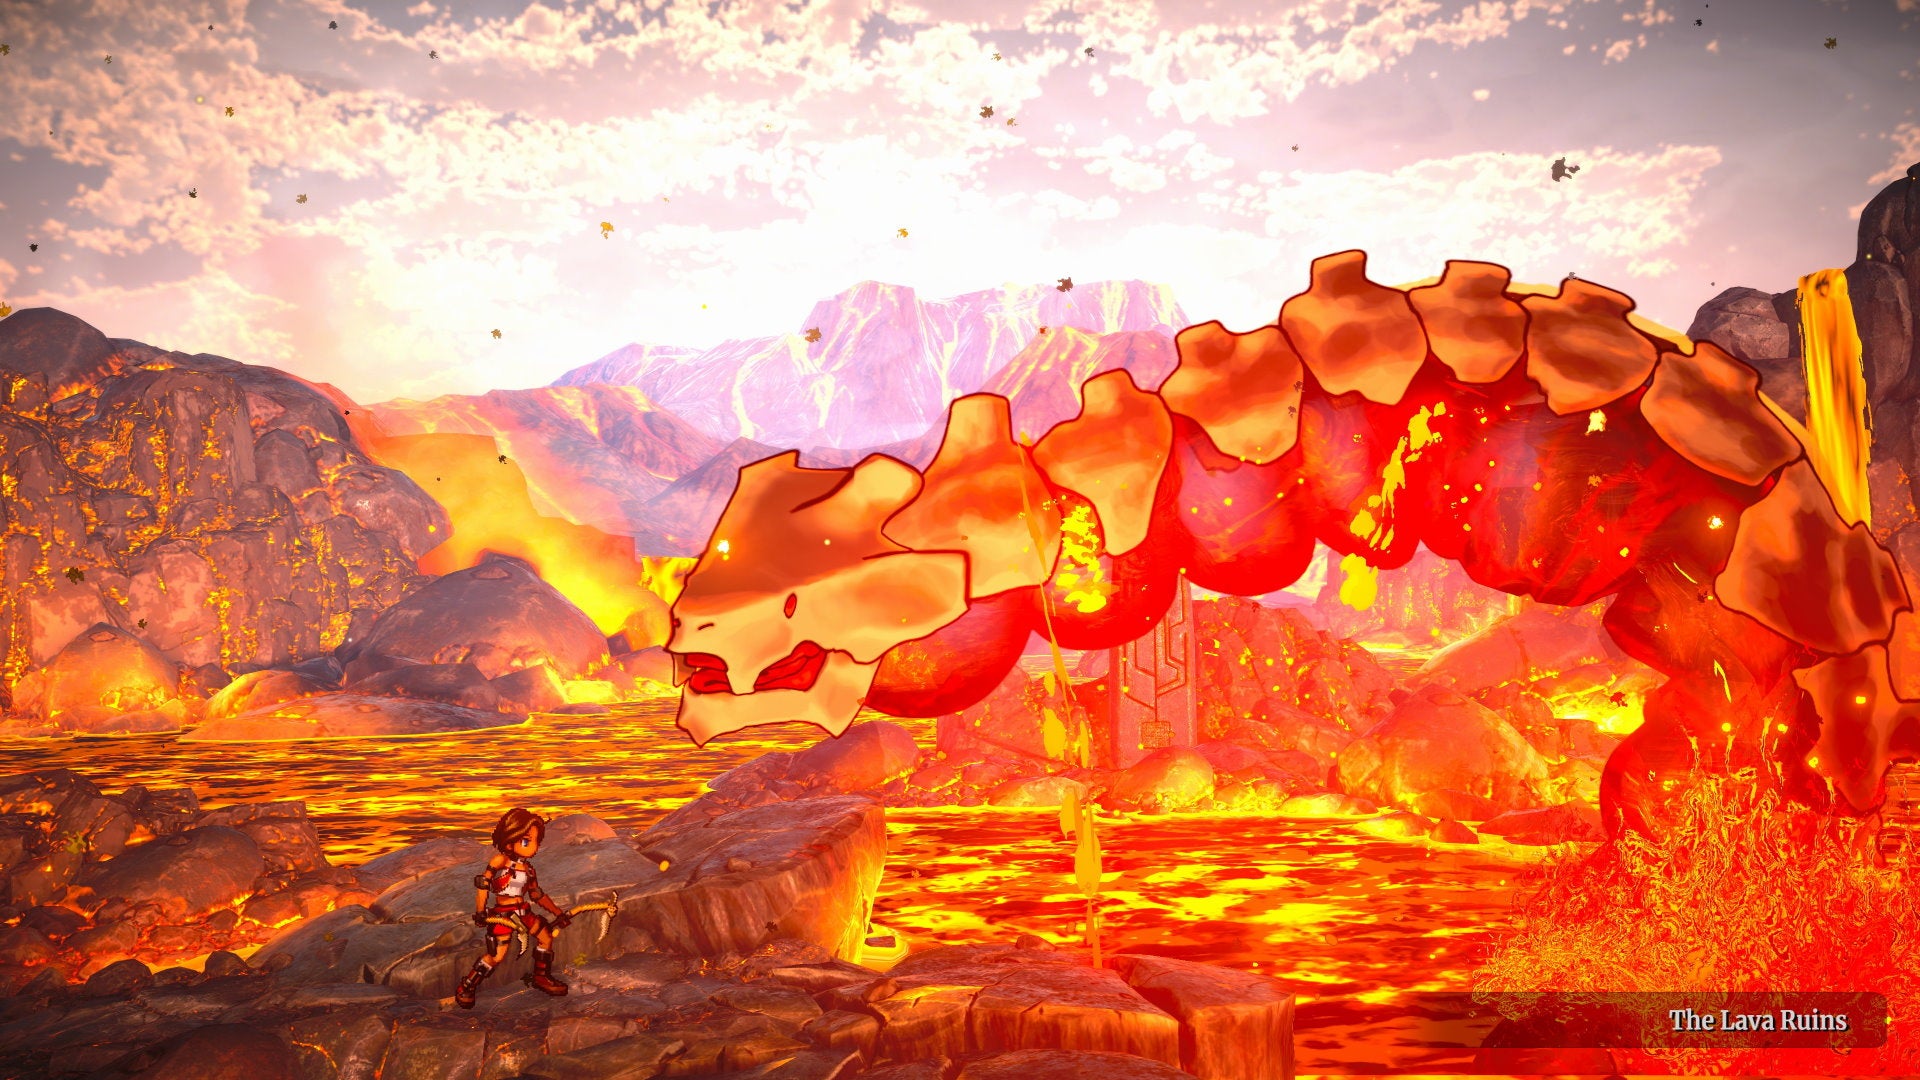 A young girl fights a giant lava snake in Euden's chronicle